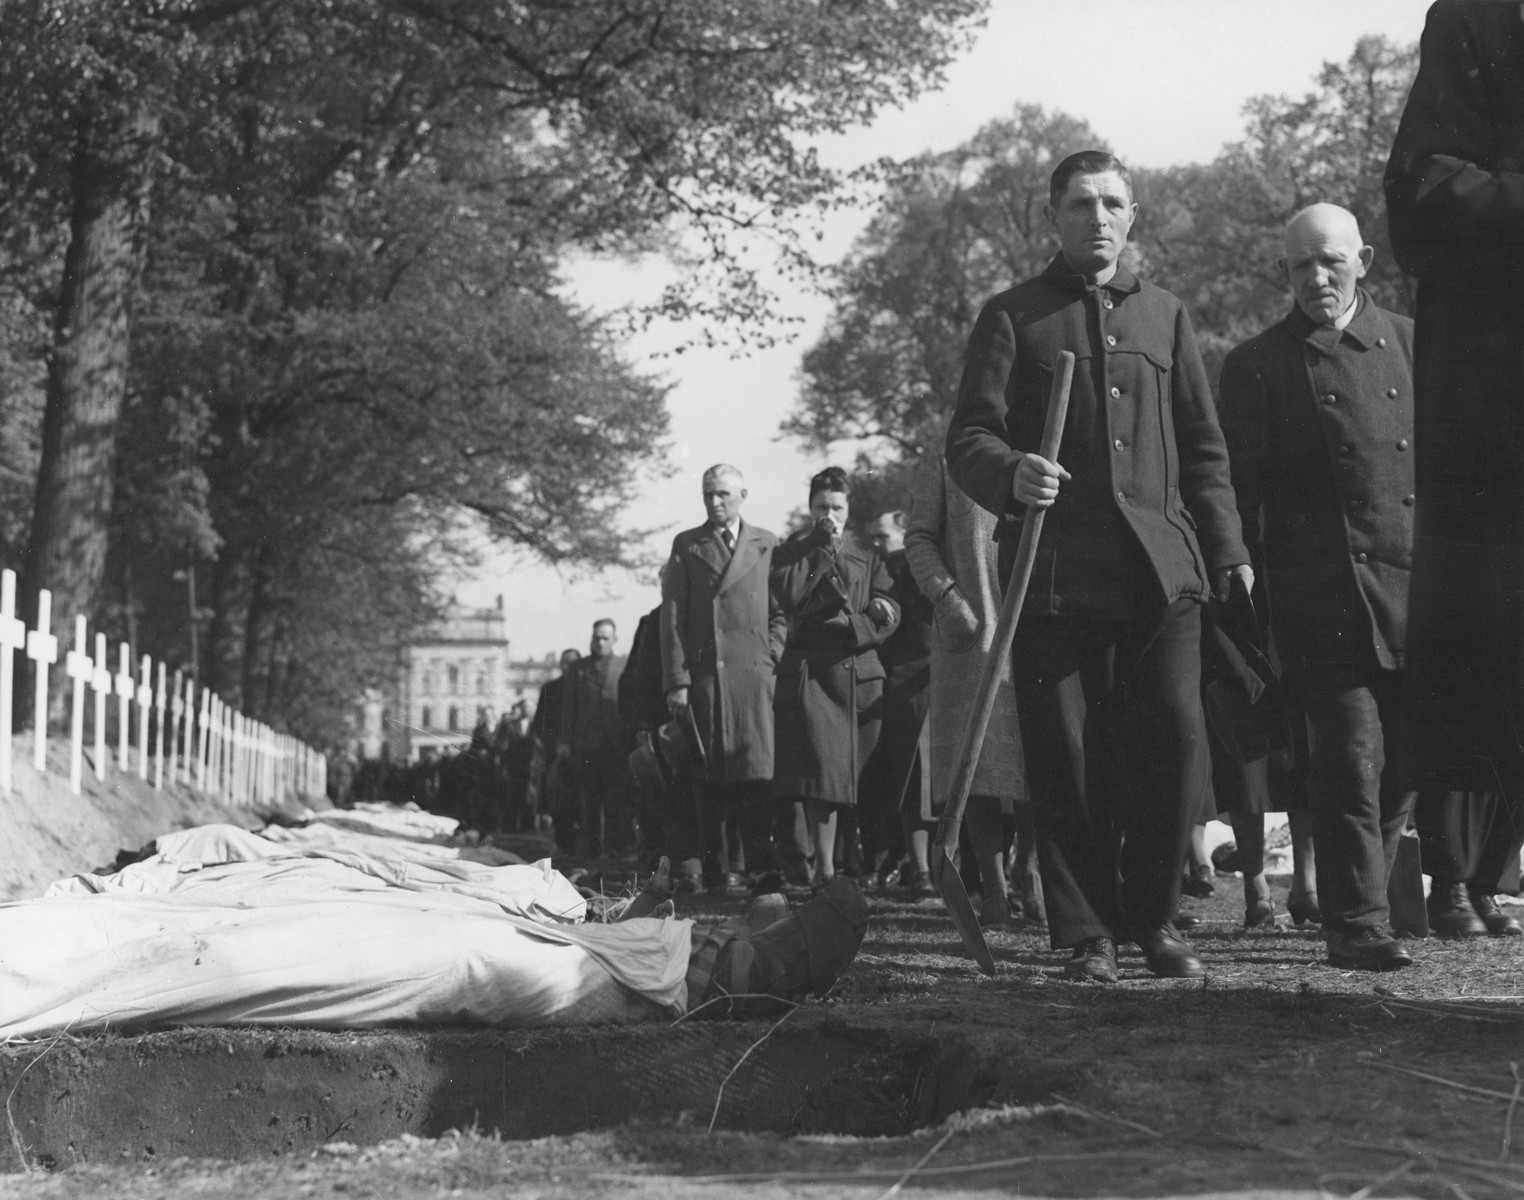 Upon the orders of the U.S. Army, the population of Ludwigslust files past the bodies of prisoners killed in the Woebbelin concentration camp, which have been laid out for burial in individual graves on the palace grounds of the Archduke of Mecklenburg.  The men carry shovels to bury the victims.